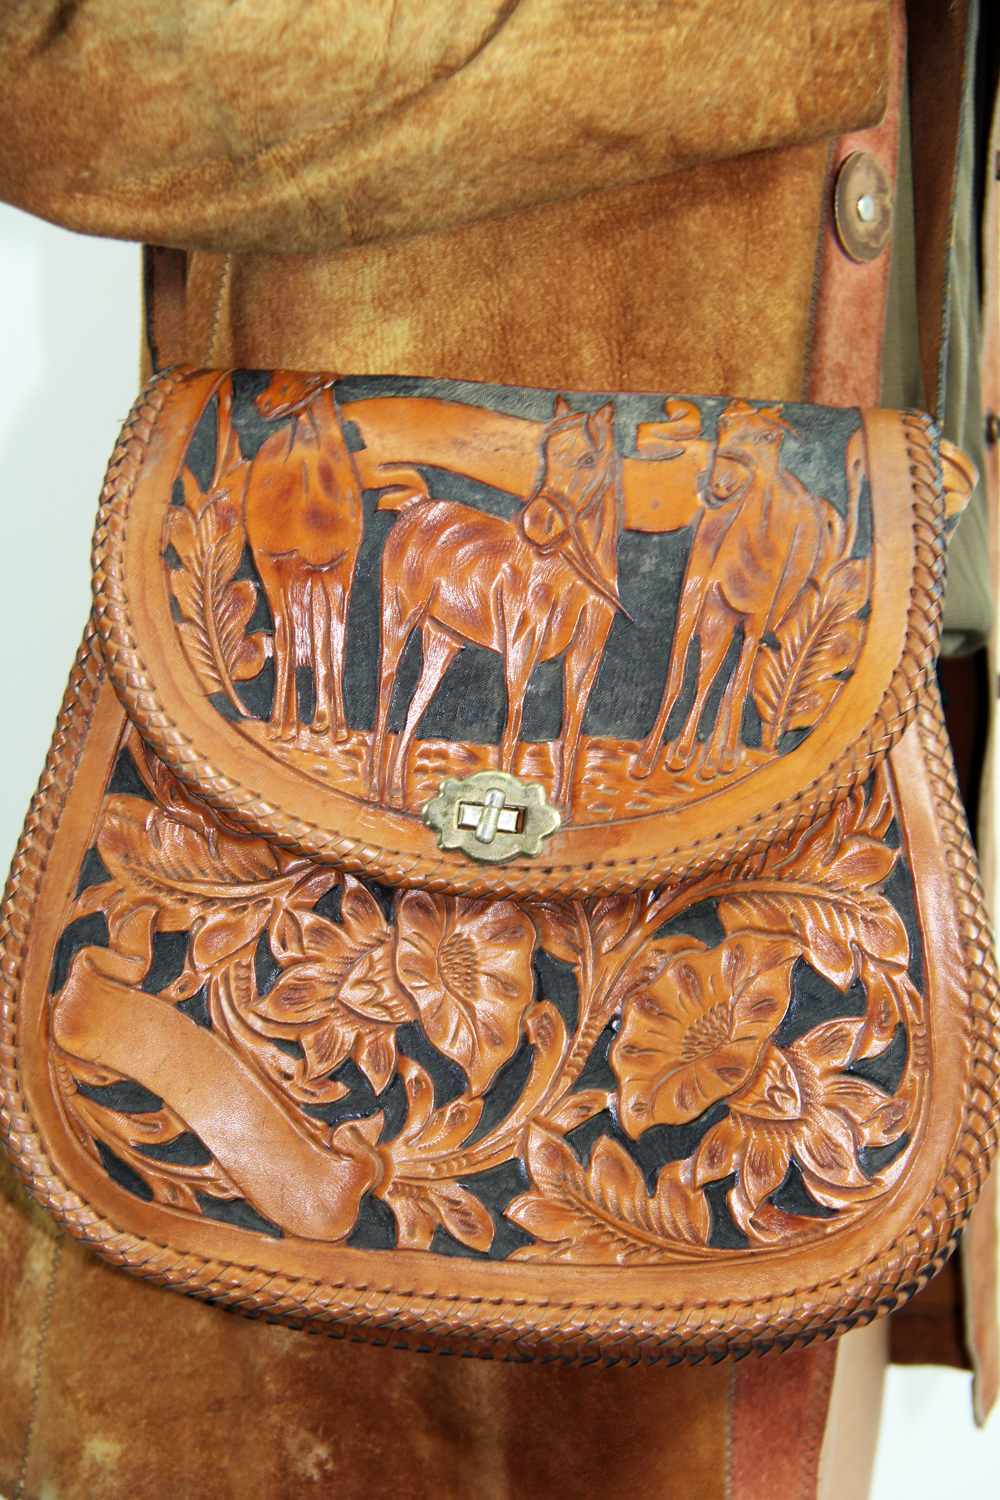 https://www.etsy.com/listing/115158598/mexican-tooled-horse-leather-purse?ref=listing-shop-header-3